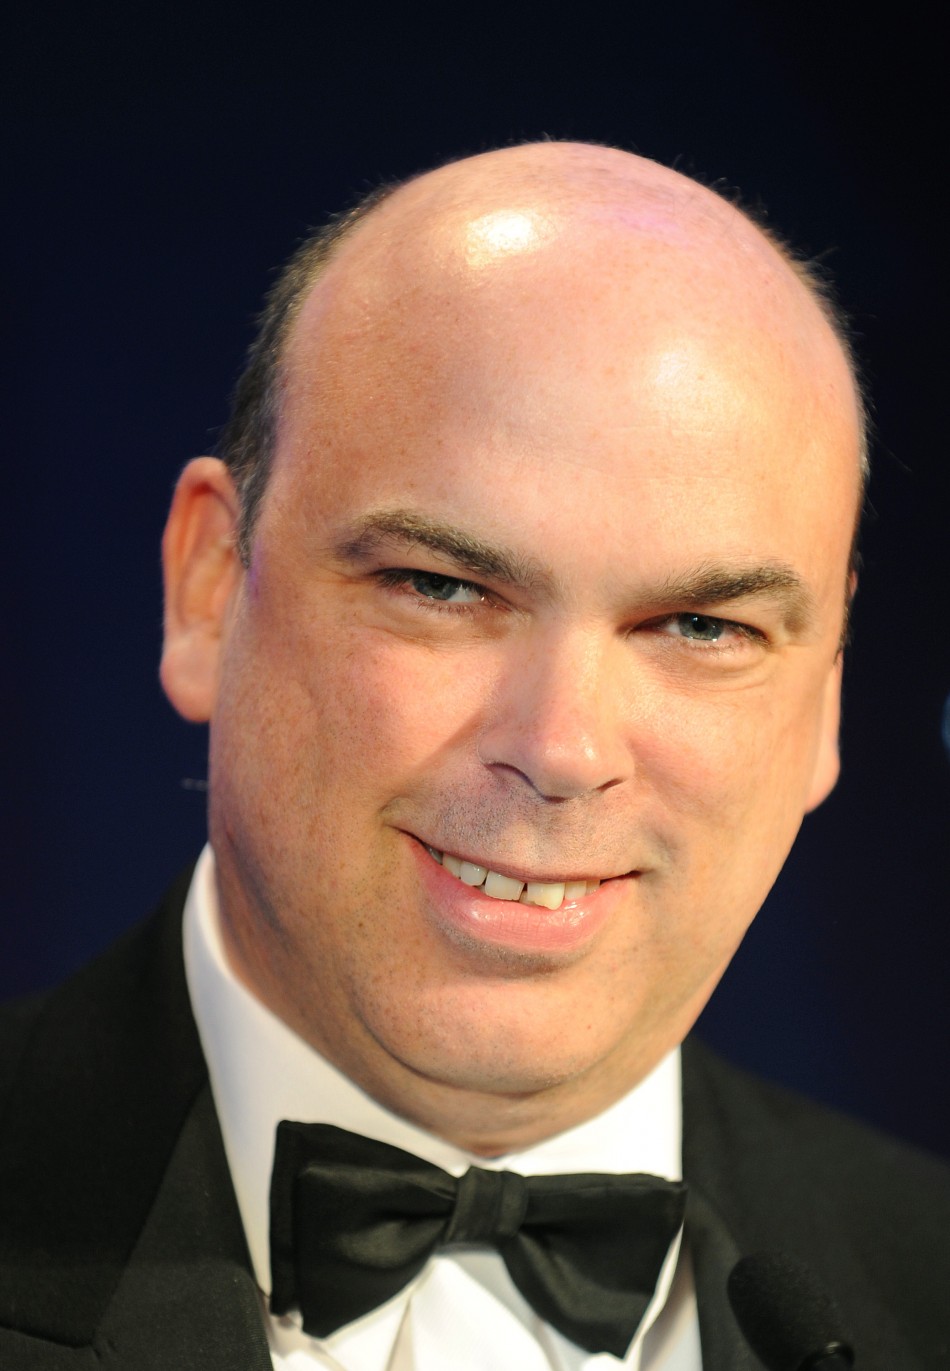 Autonomy Founder <b>Mike Lynch</b> &#39;Flatly Rejects&#39; HP Allegations as Stock ... - ml